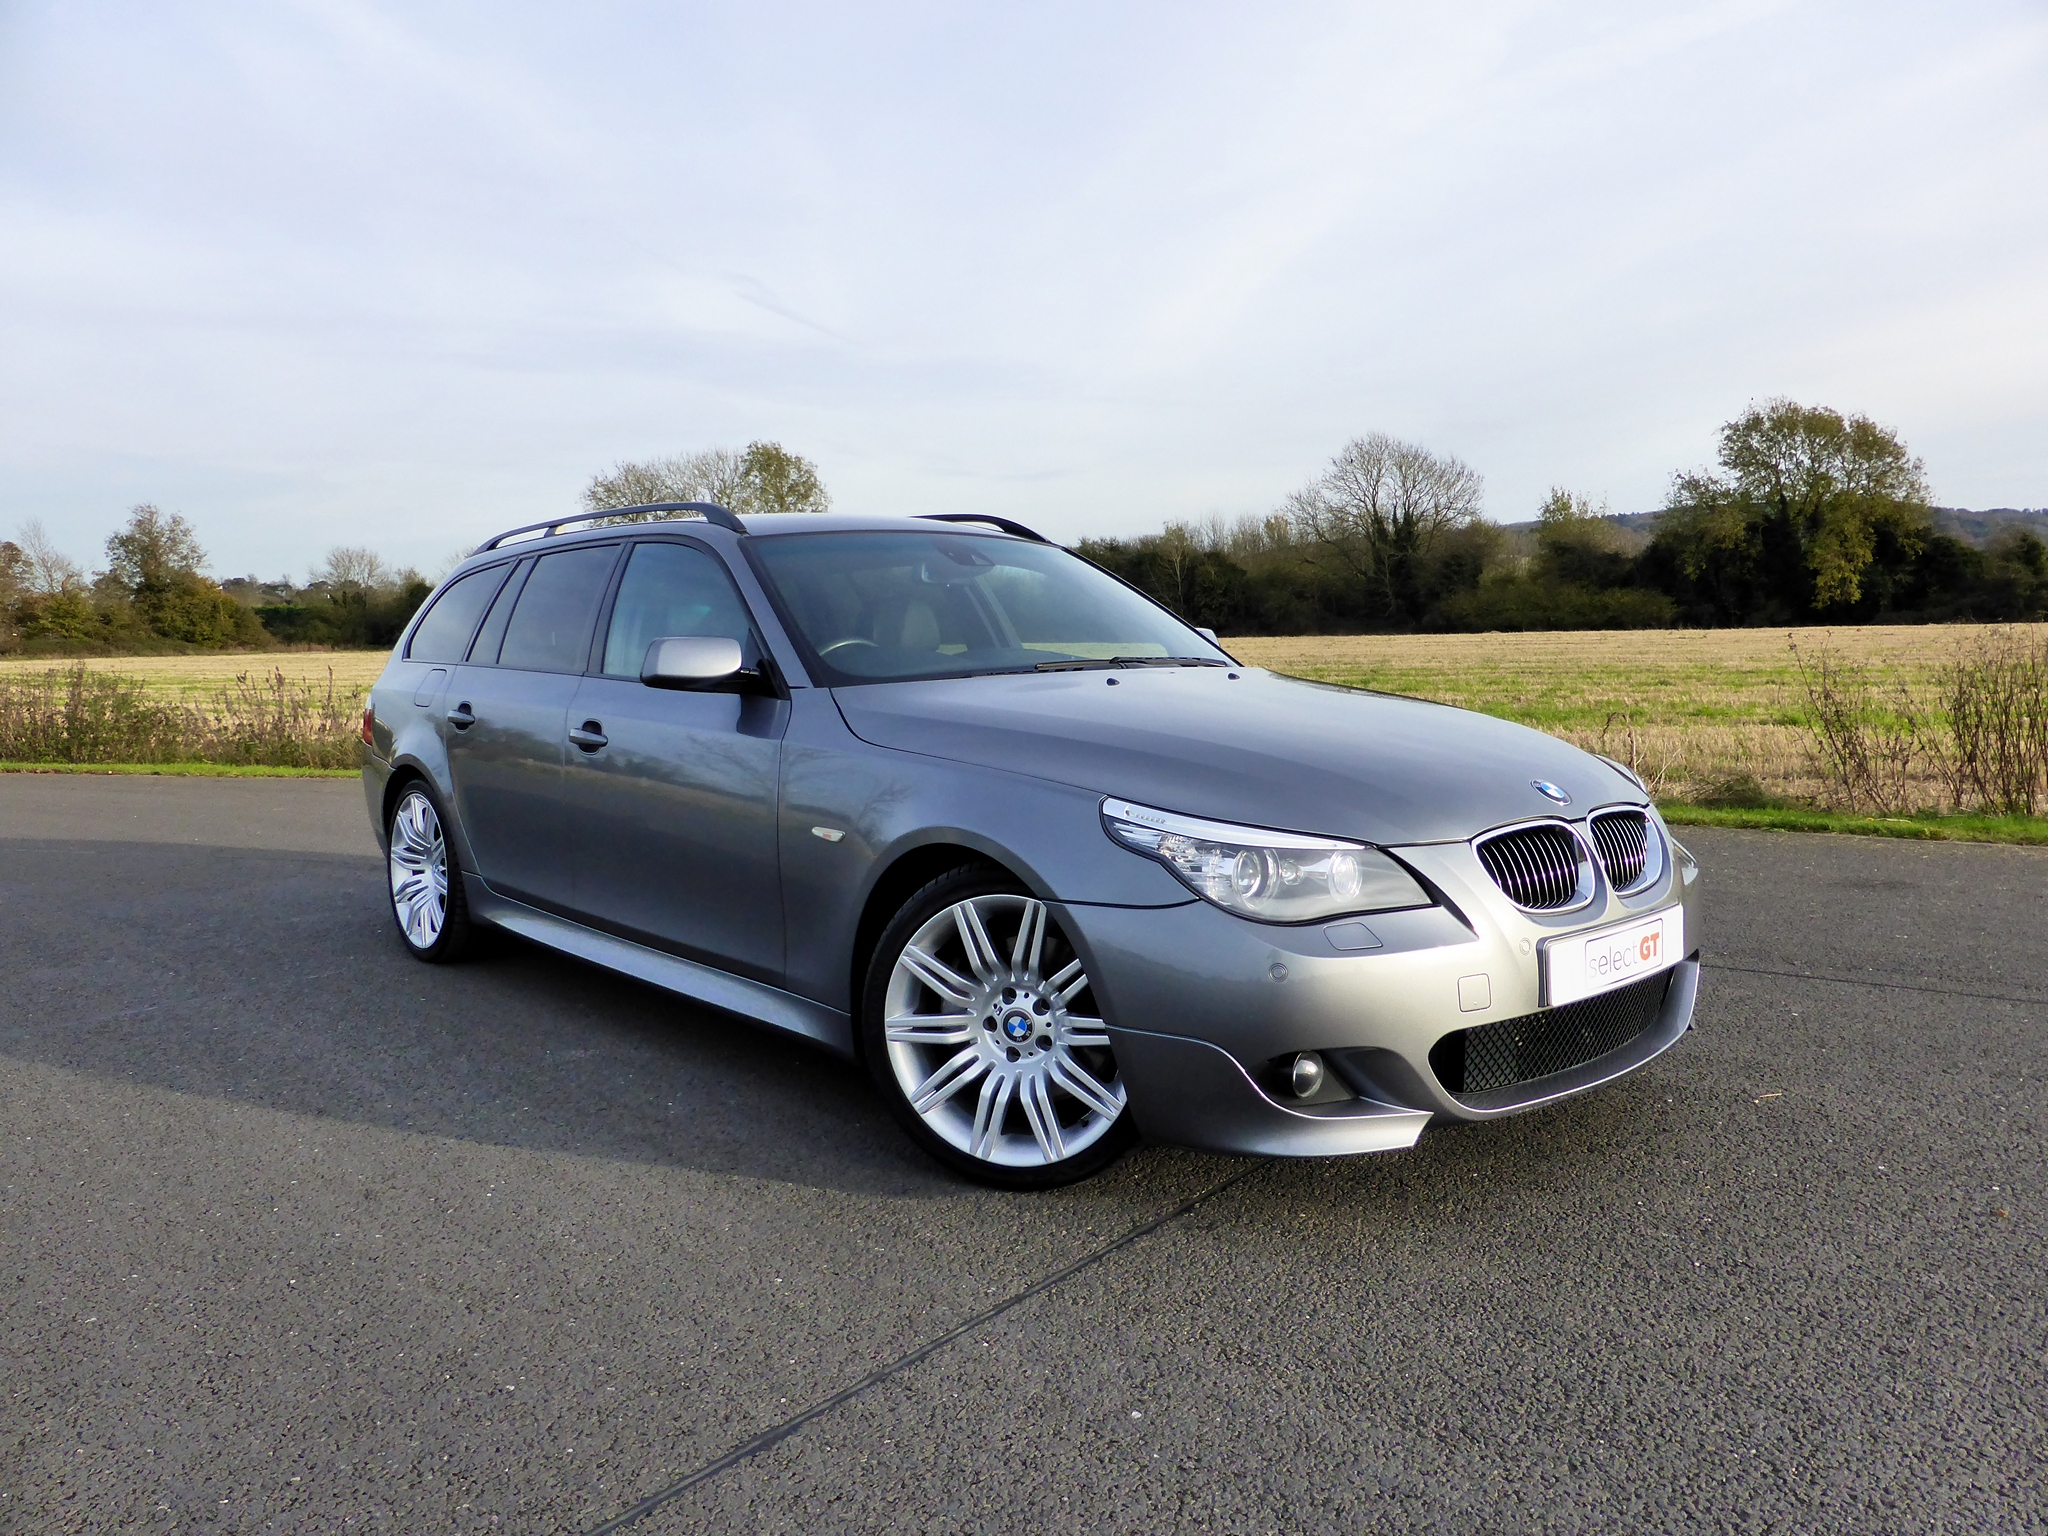 2009 BMW 535D M Sport Touring - select GT